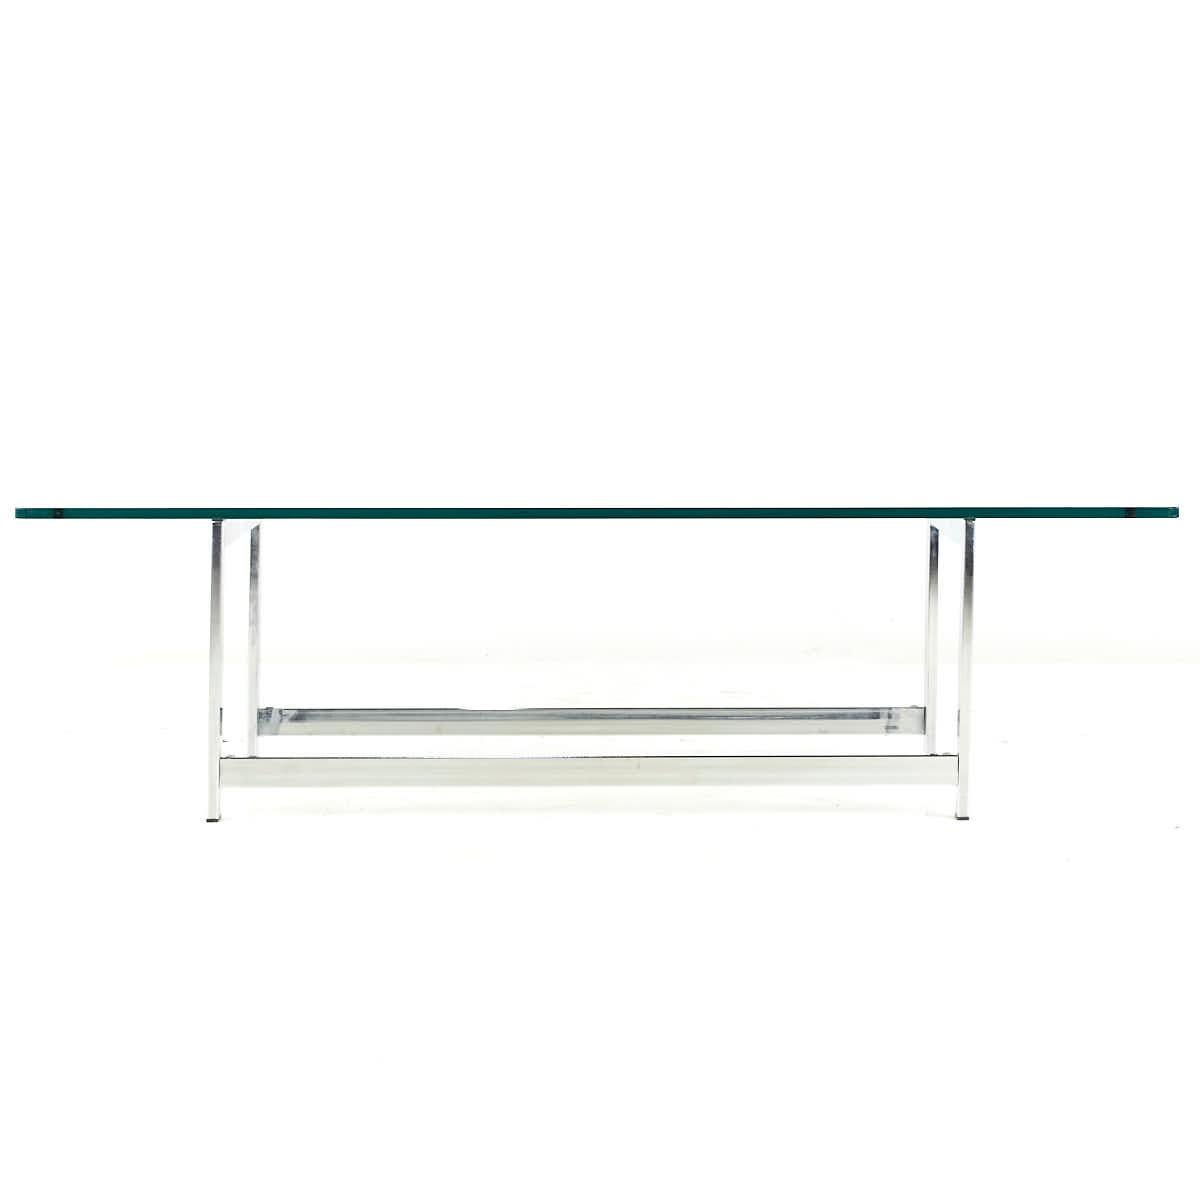 Milo Baughman Style midcentury Chrome and Glass Coffee Table

This coffee table measures: 60 wide x 25 deep x 16.25 inches high

All pieces of furniture can be had in what we call restored vintage condition. That means the piece is restored upon